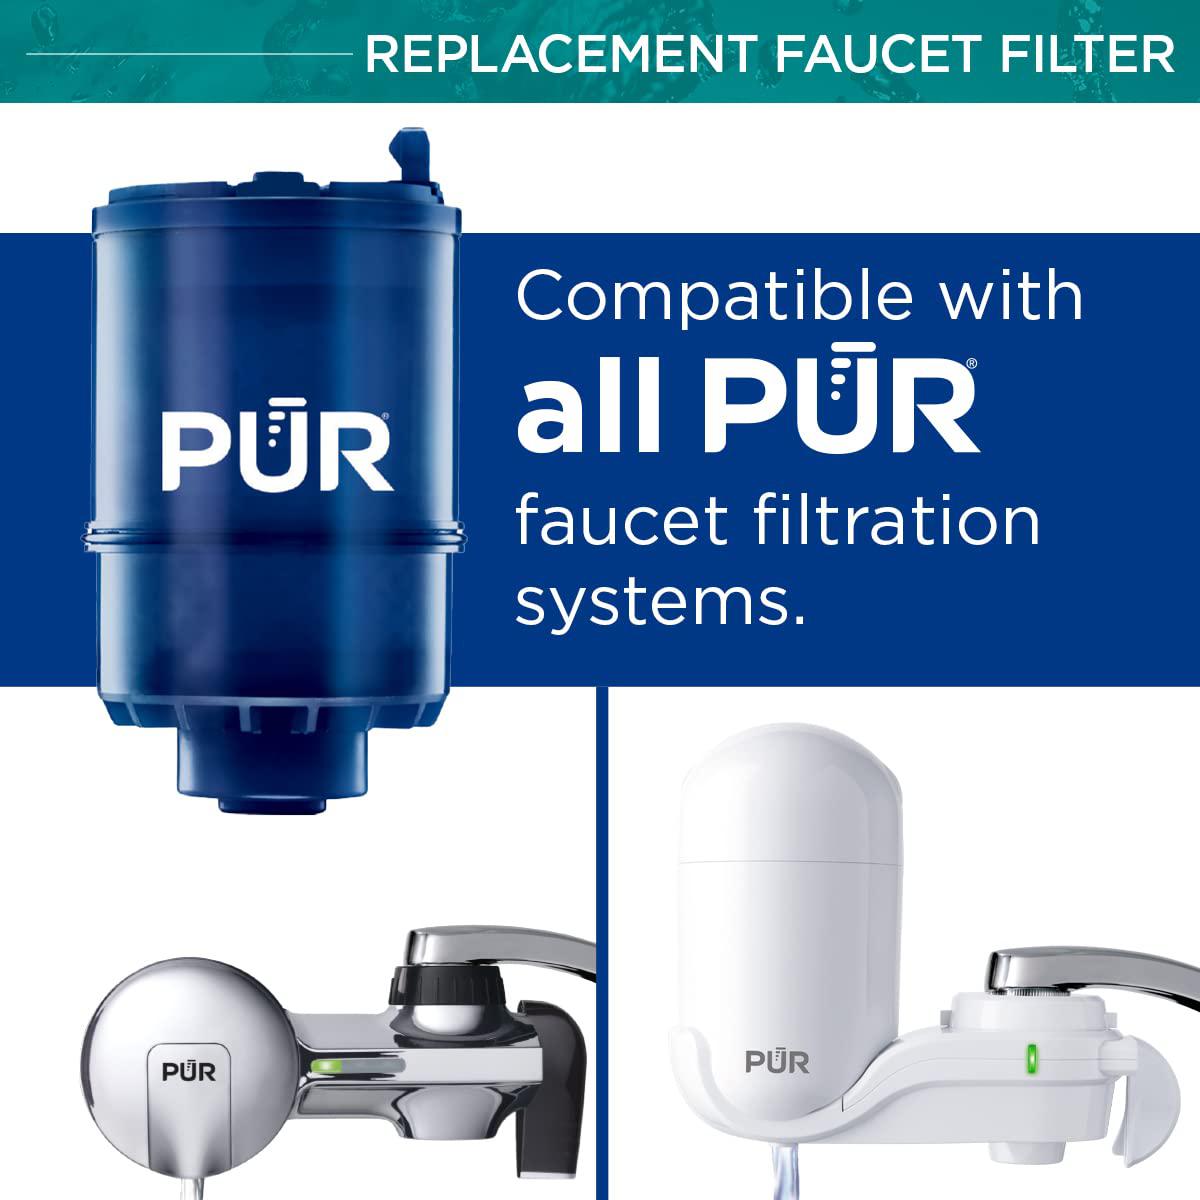 pur plus mineral core faucet mount water filter replacement (2 pack) - compatible with all pur faucet filtration systems